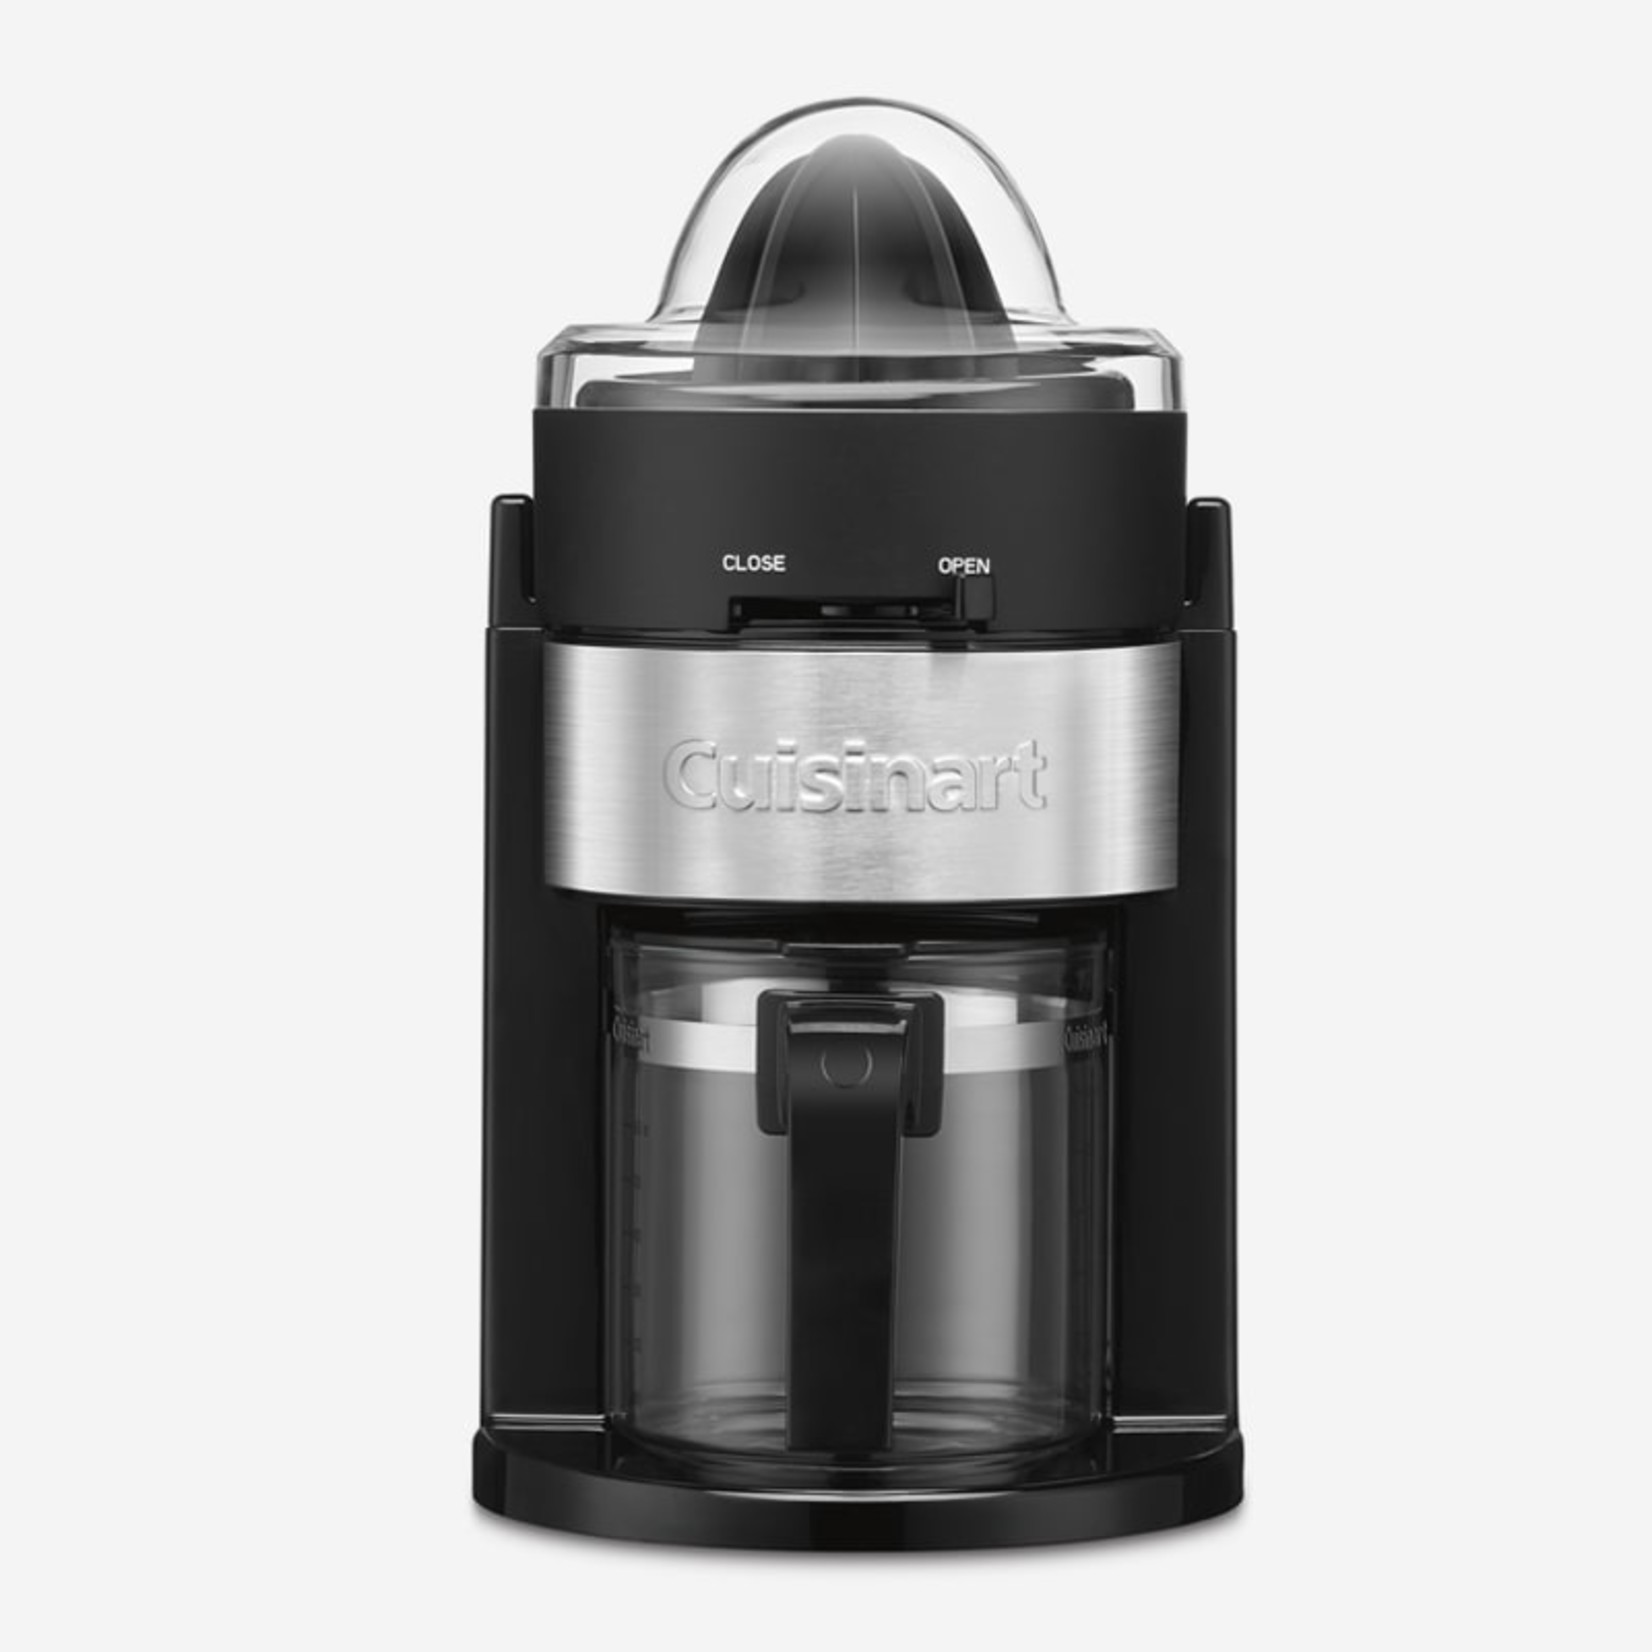 CUISINART CUISINART Juicer with Glass Carafe